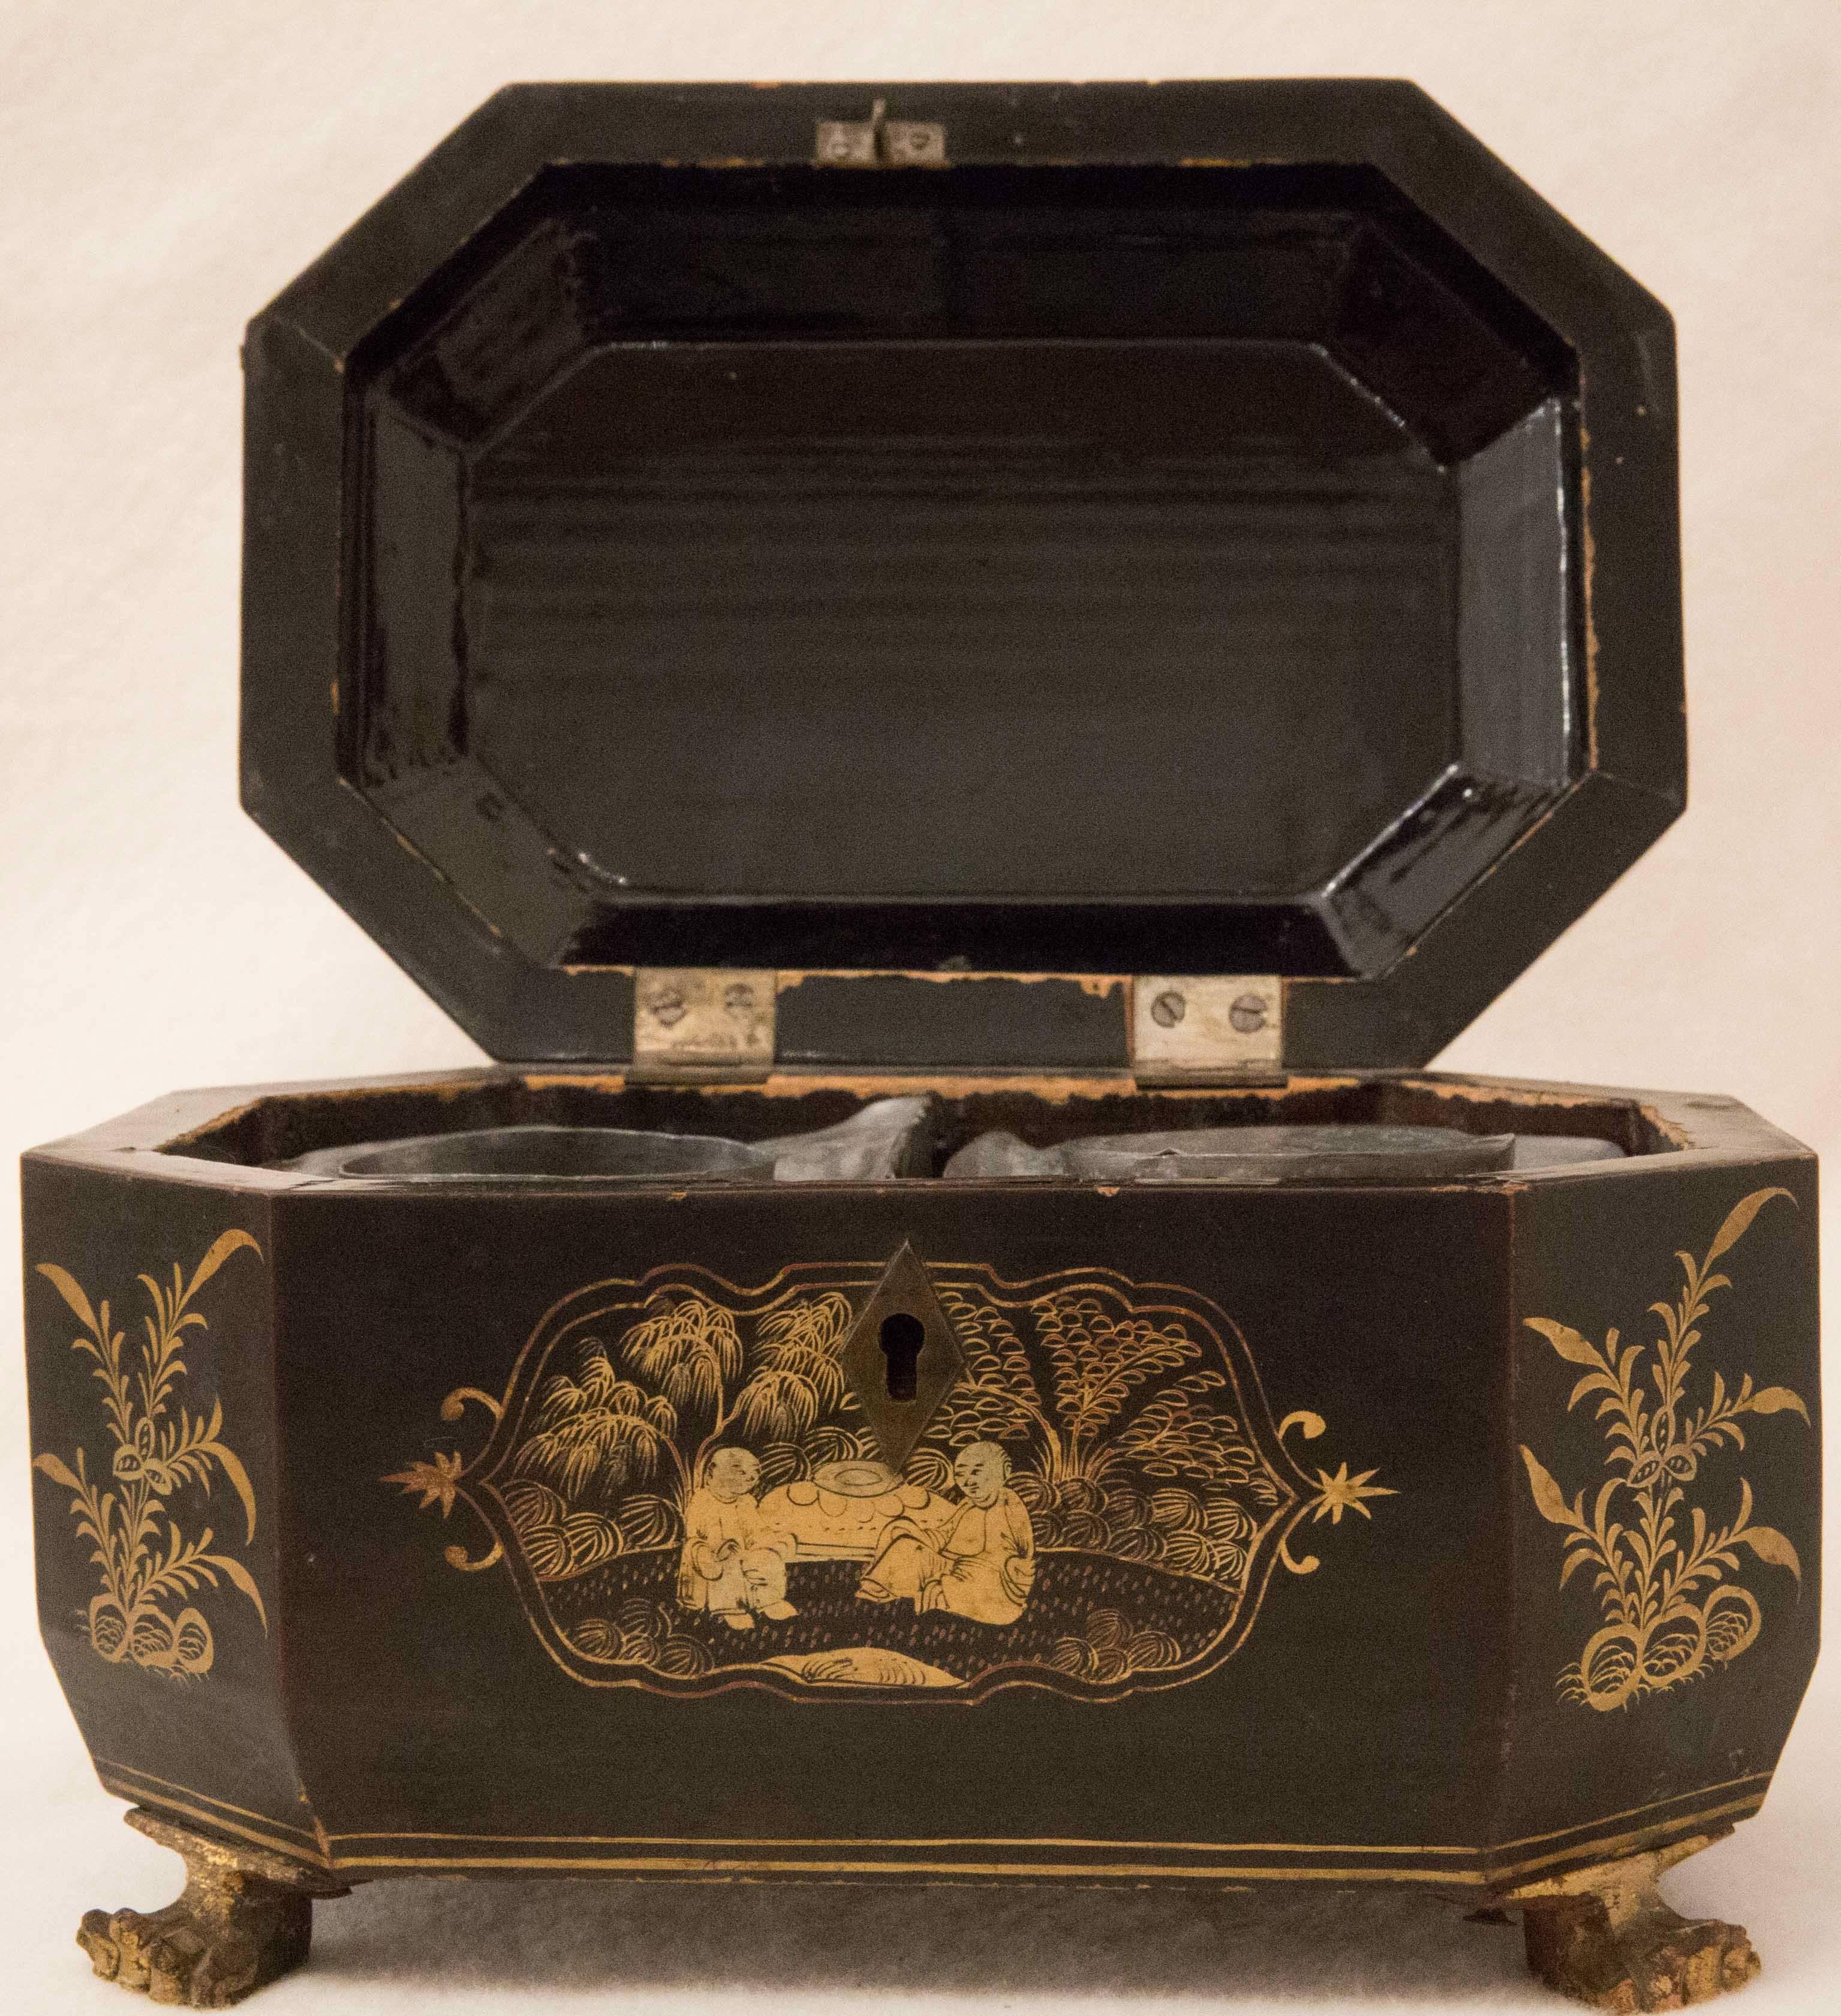 Beautiful 18th century Chinese export lacquered tea caddy in an octagonal shape with gilt chinoiserie decoration and cast gilded paw feet. Interior is fitted with a pair of pewter tea canisters. One set of inner lids is missing. Certain normal wear